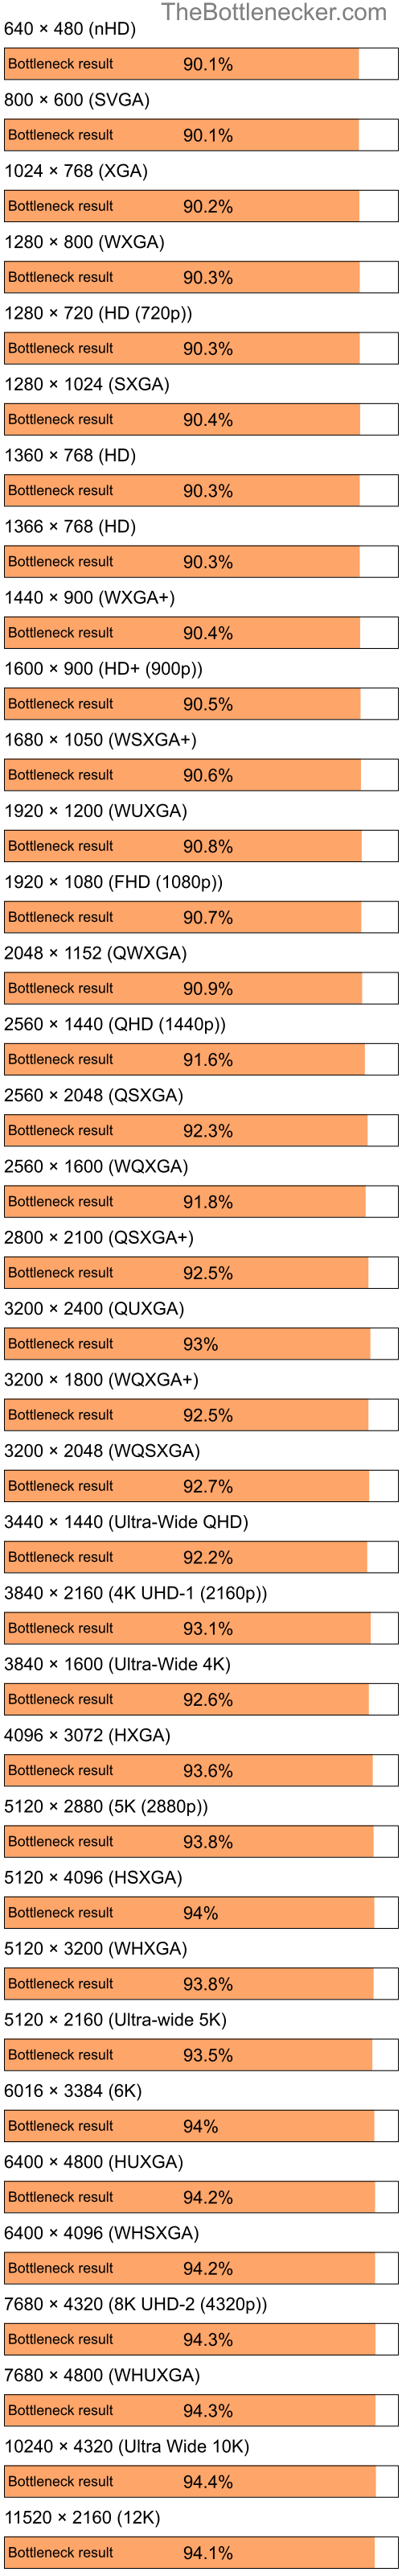 Bottleneck results by resolution for Intel Celeron M 410 and NVIDIA GeForce3 Ti 200 in General Tasks